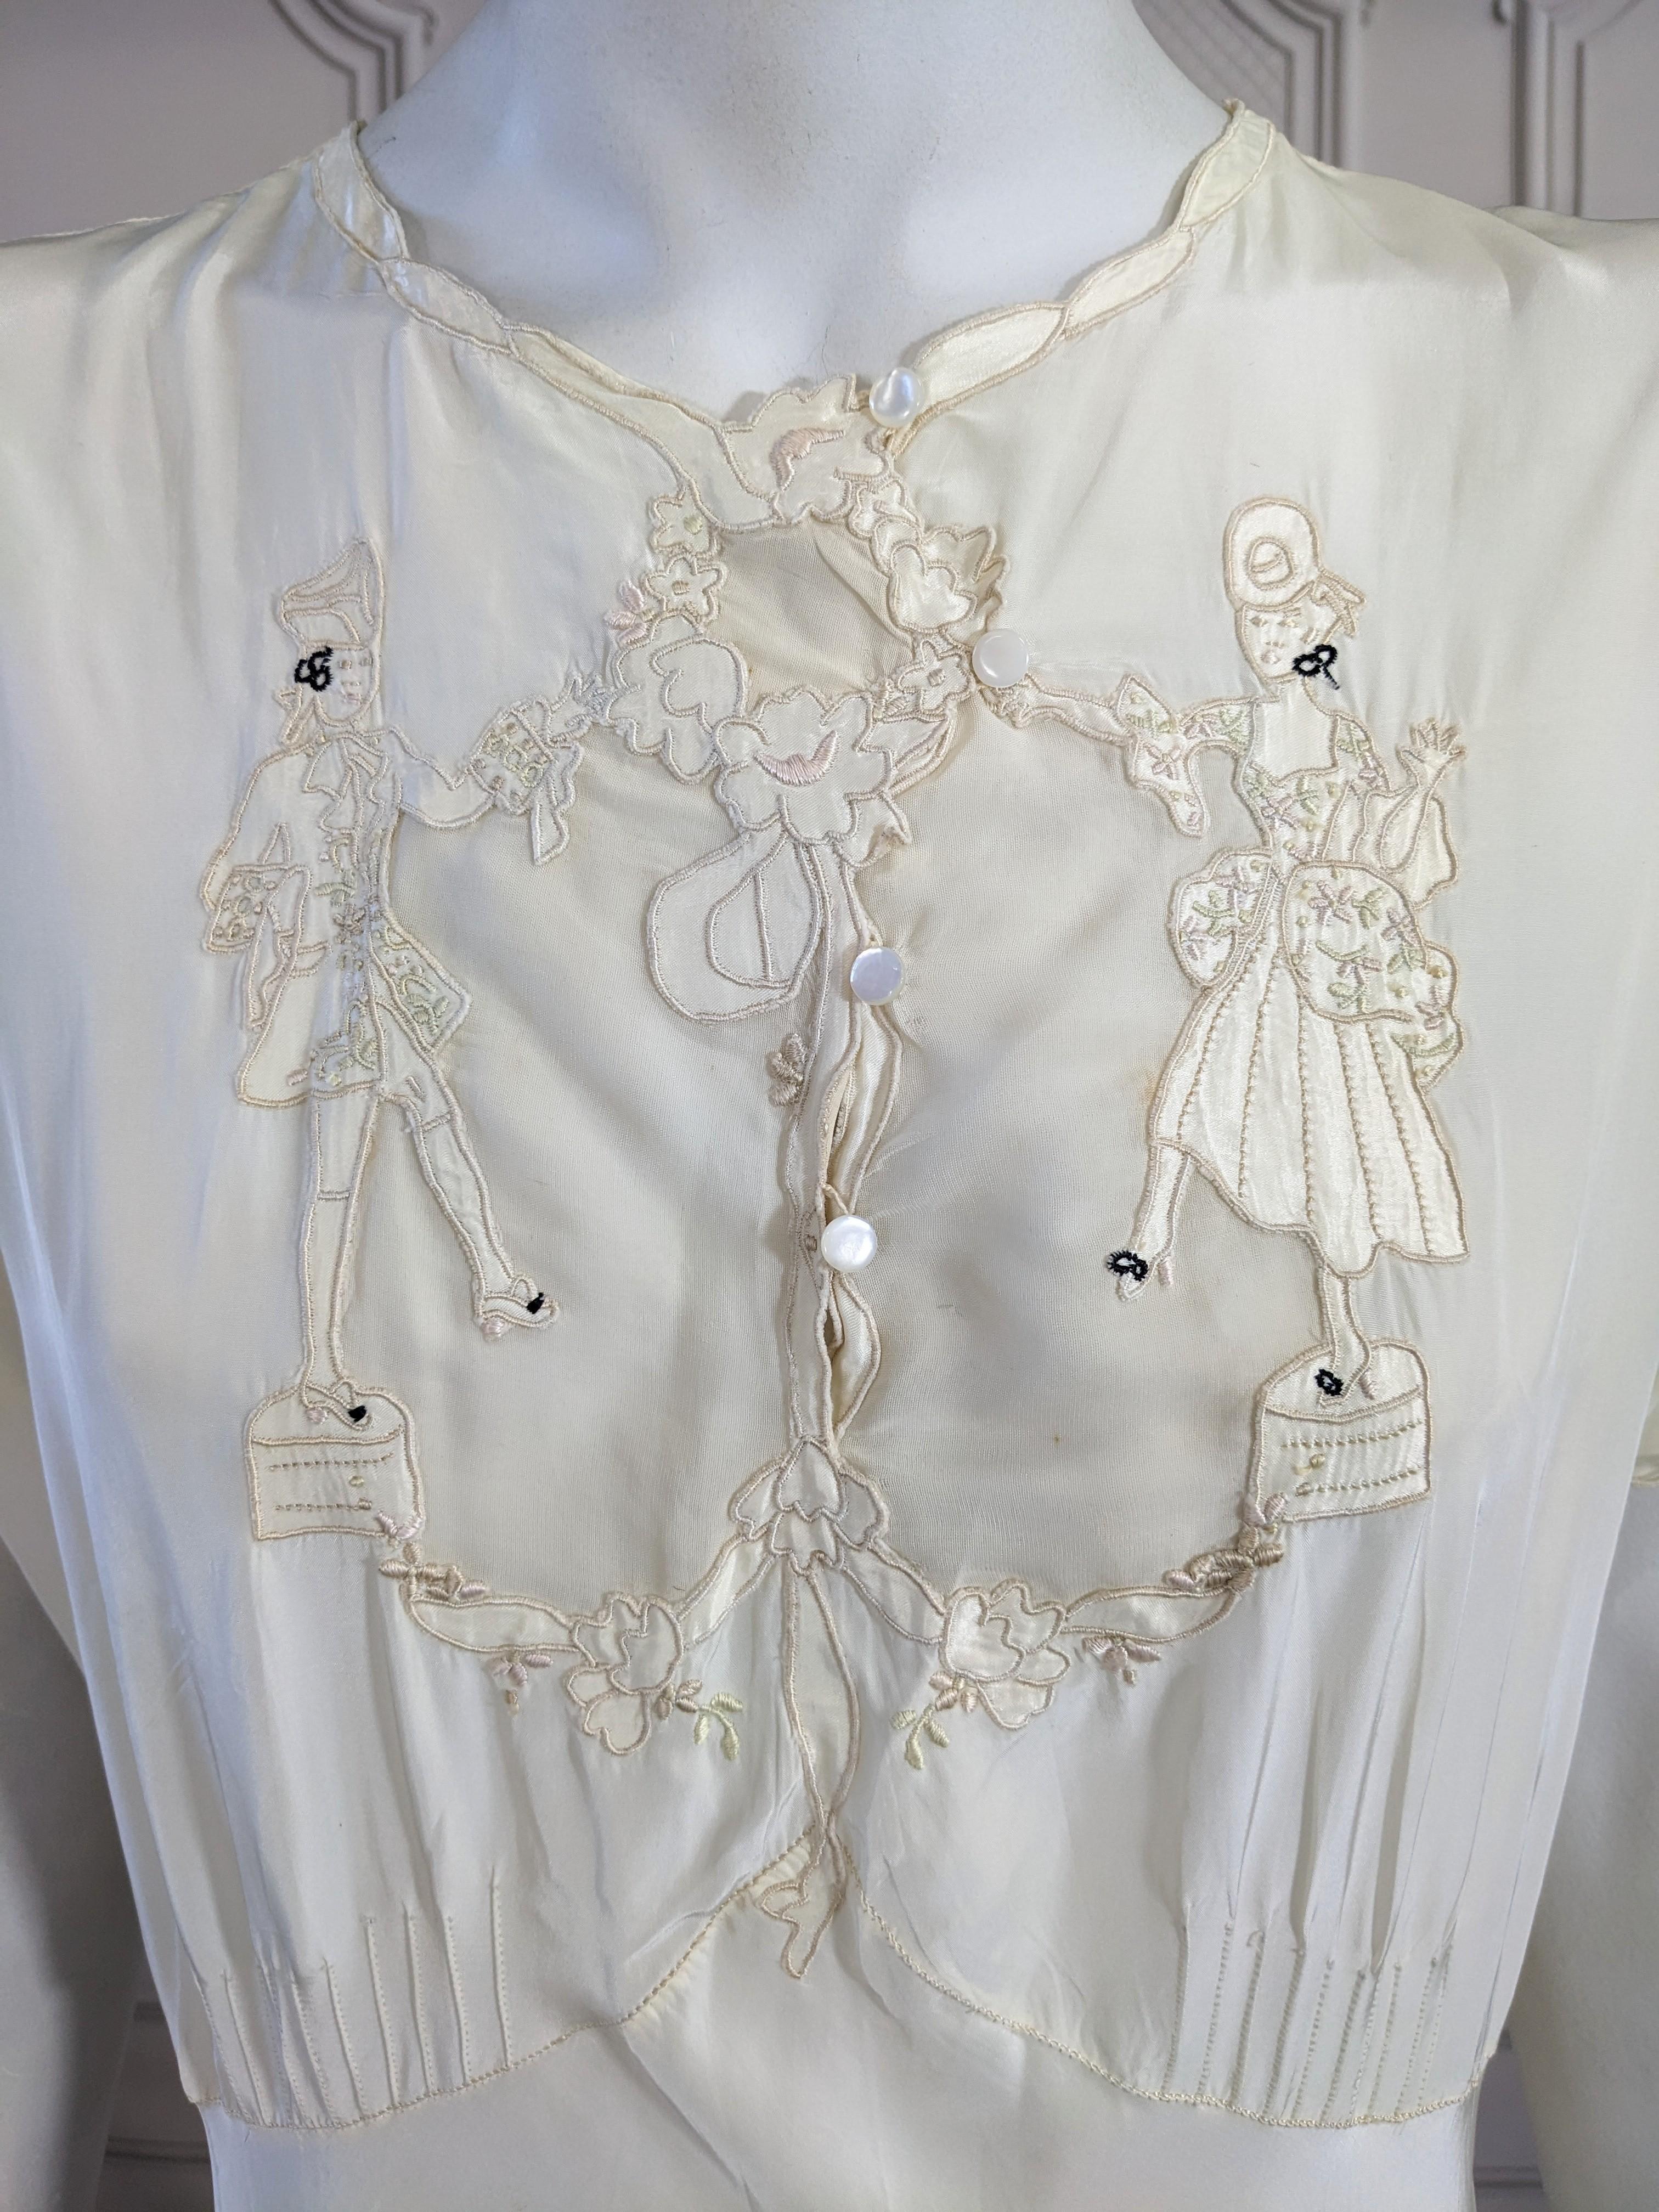 Charming Ivory Slip Dress, 18th Century Courtesan Embroideries In Good Condition For Sale In New York, NY